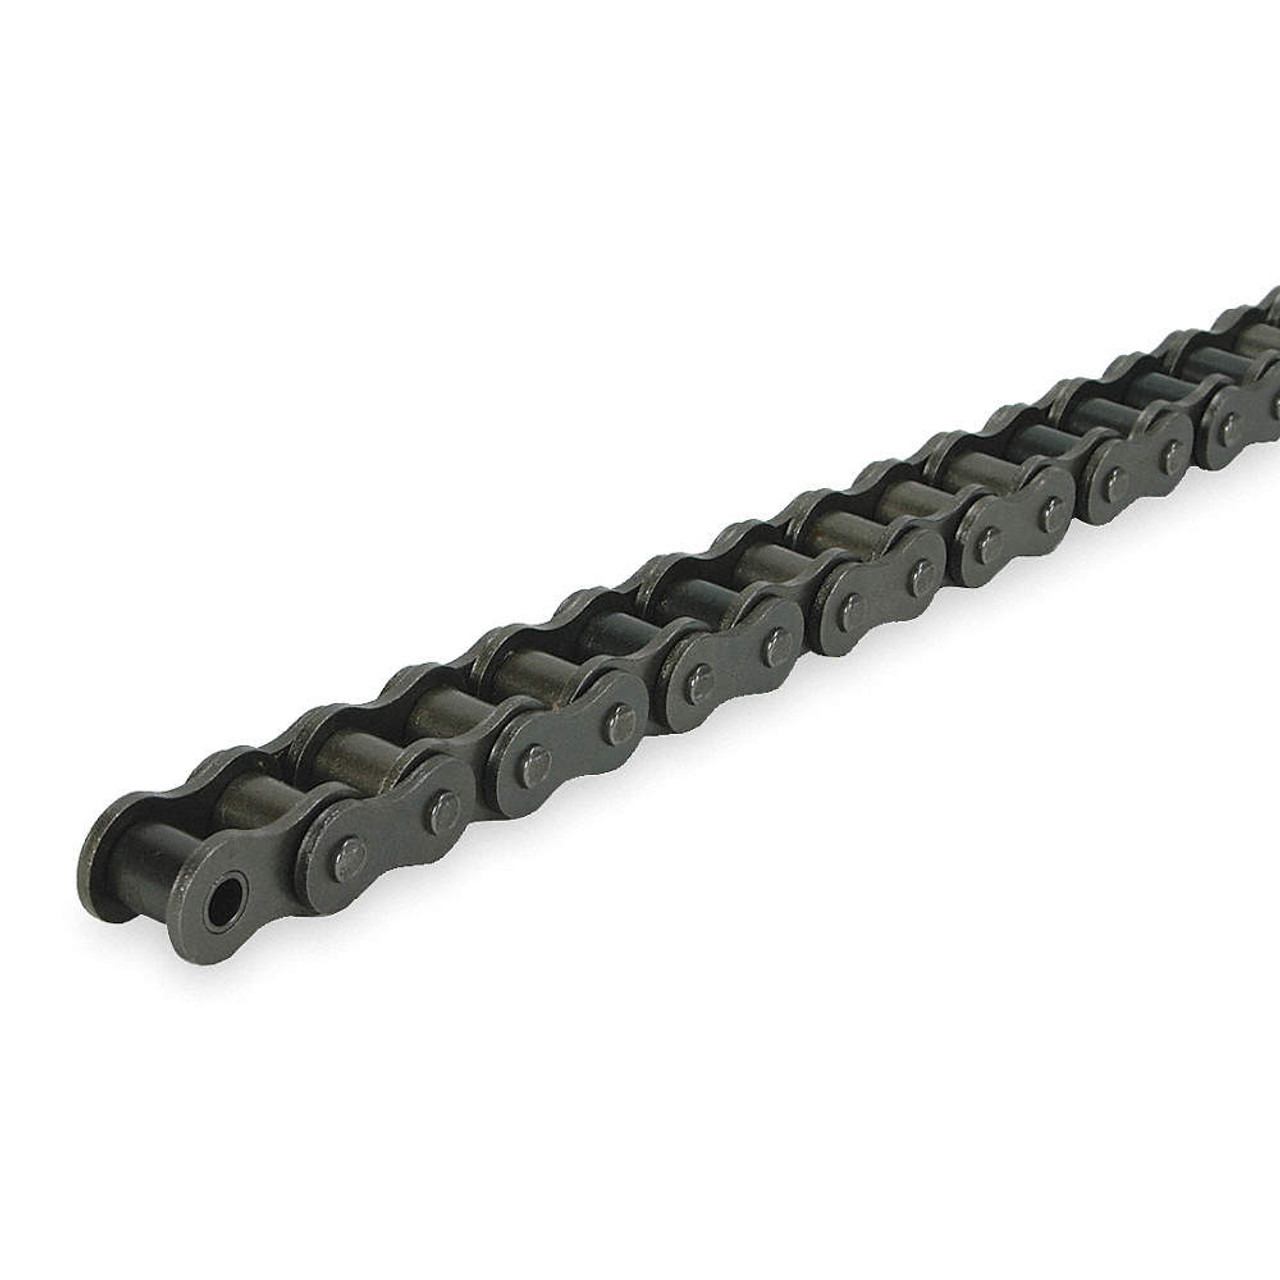 Dry Film Coated Riveted Roller Chain w/Chrome Pins - 10' Box  DRV-60-1RDC-10FTNCA